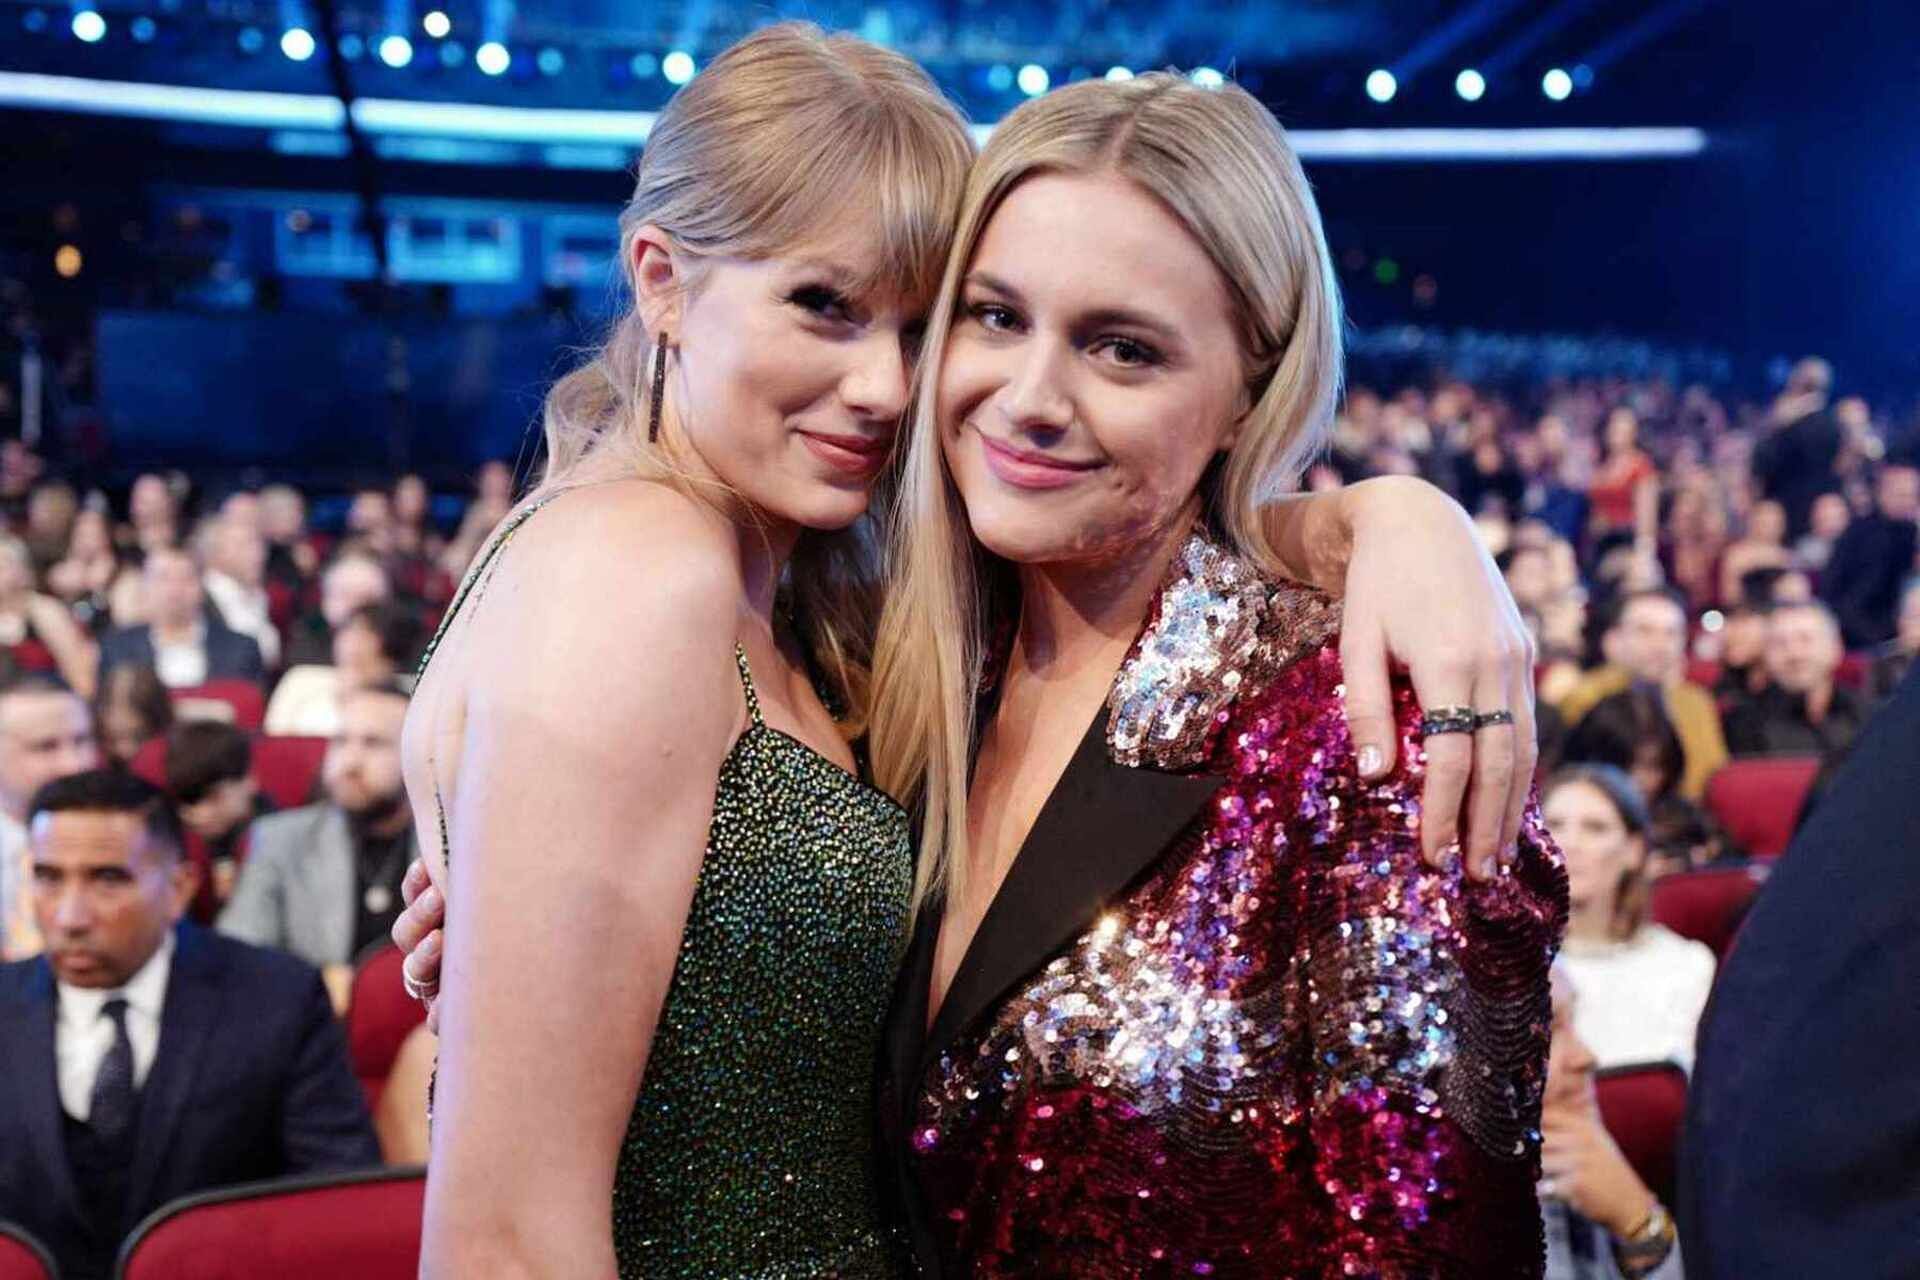 Kelsea Ballerini stopped her show to enquire about Taylor Swift Eras Tour update (Image via John Shearer/AMA2019/Getty Images)